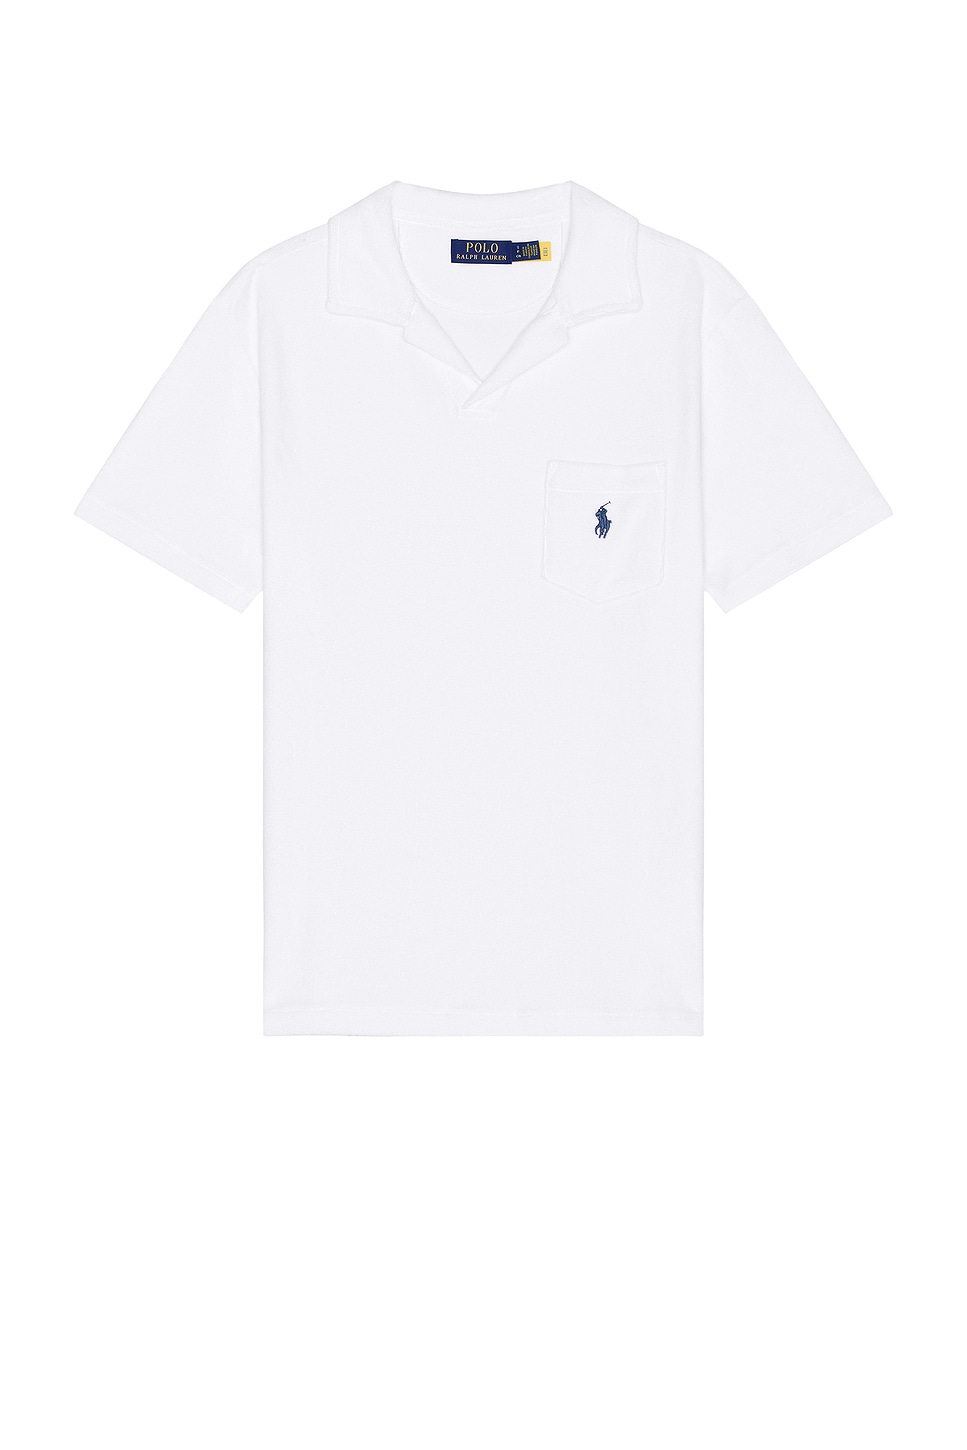 Image 1 of Polo Ralph Lauren Terry Knit Shirt in White